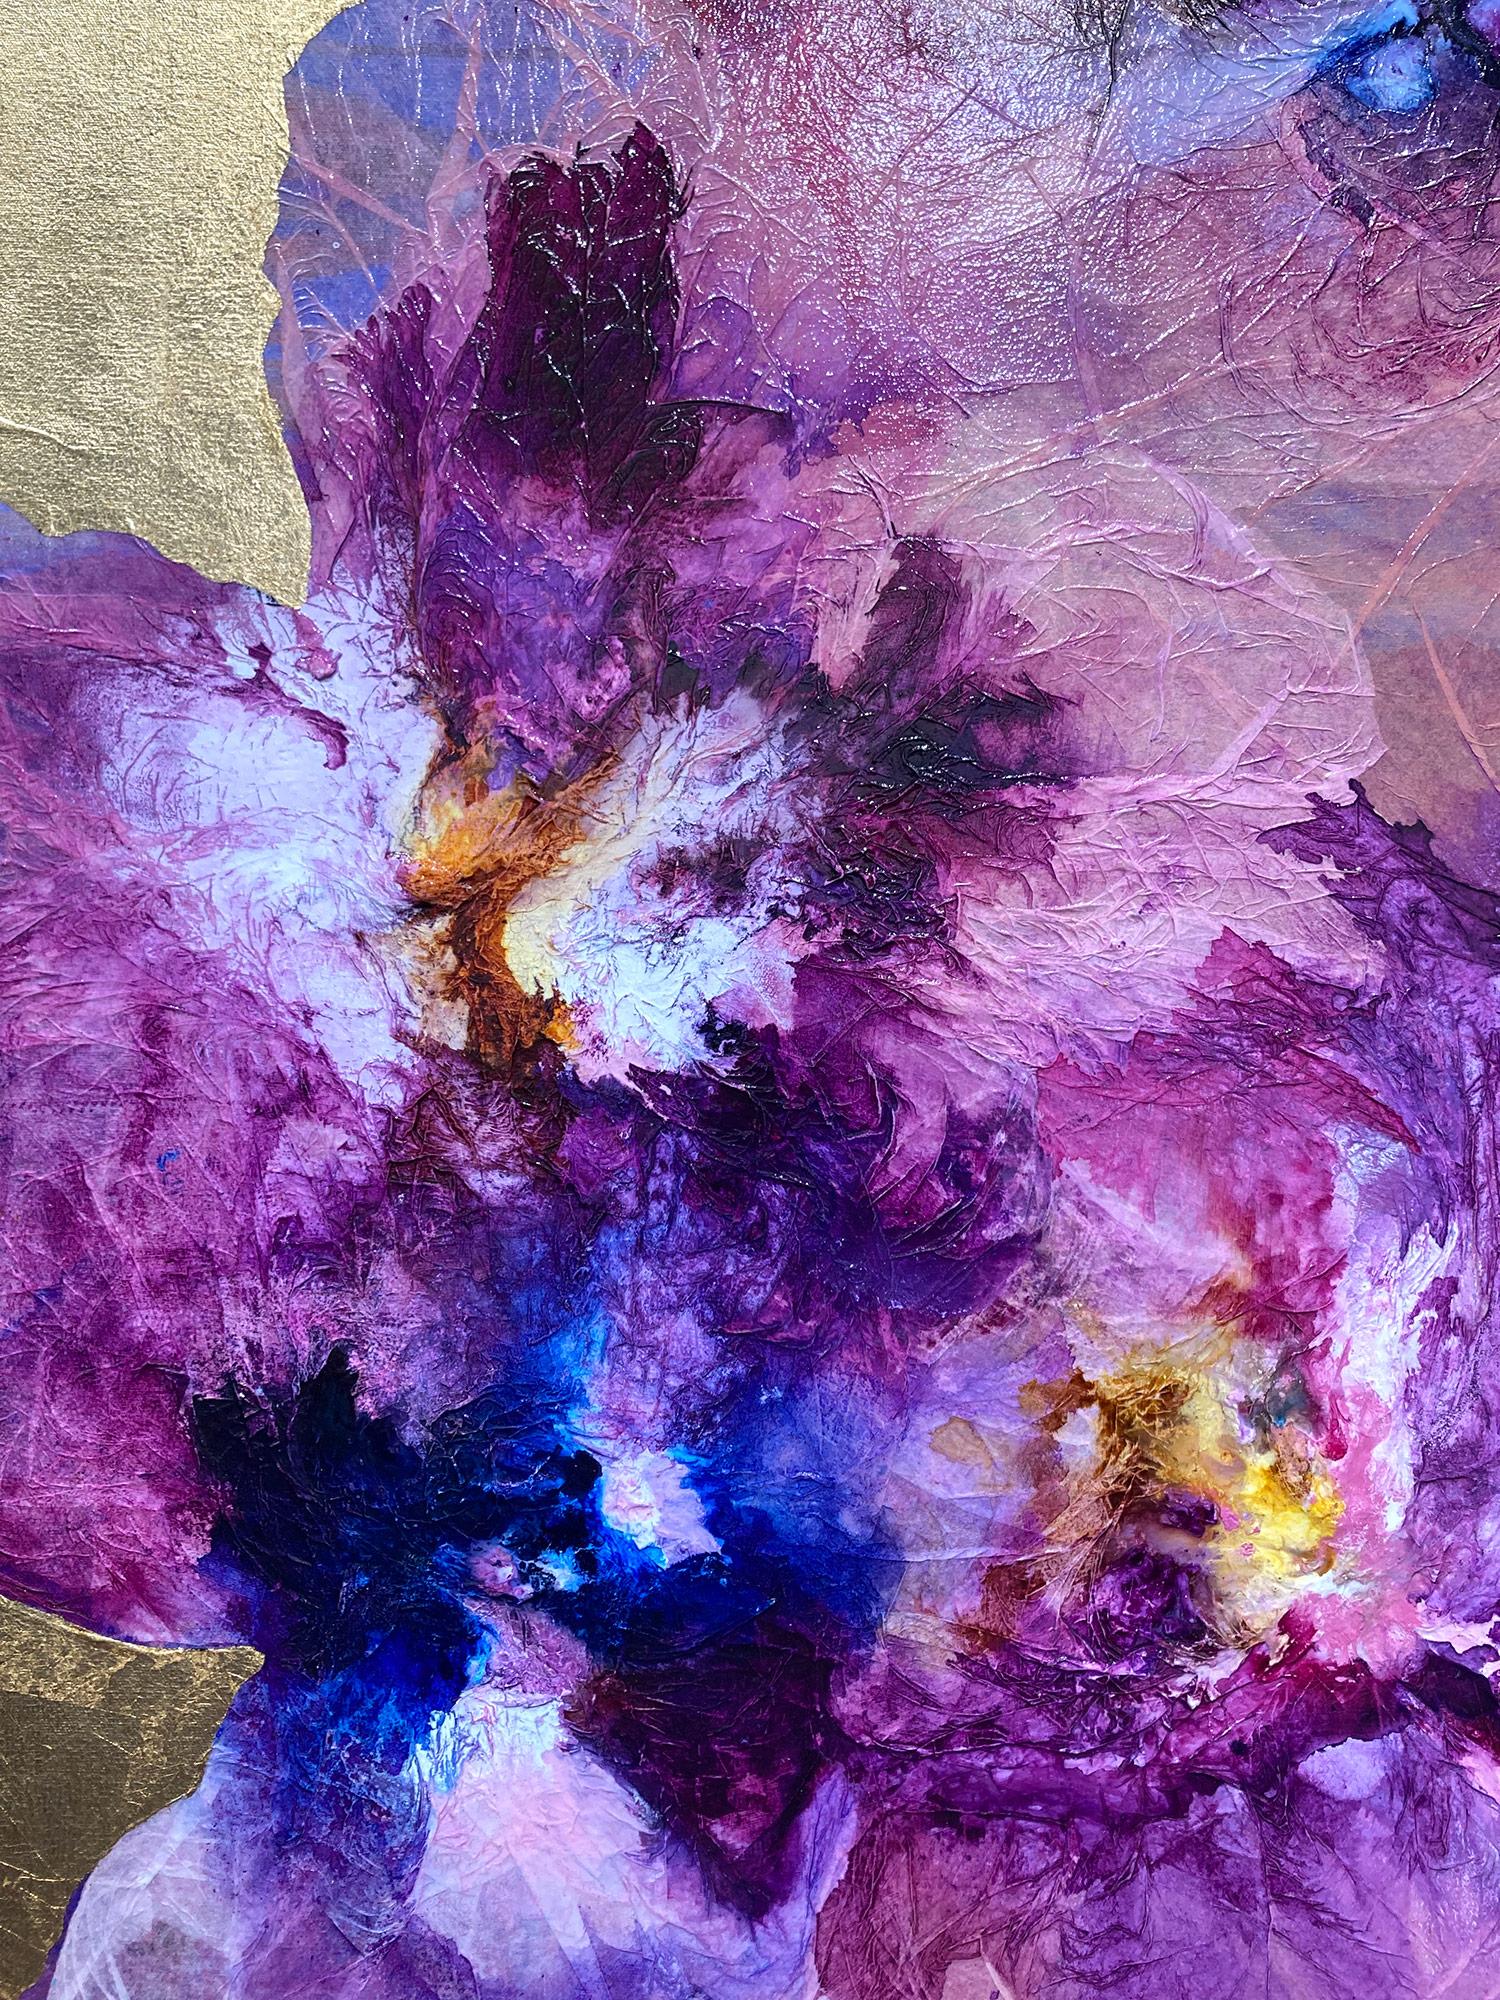 This painting by Antoinette is a stylish and luxurious mixed media on canvas piece depicting abstract flowers with bold use of color and contrast. The gold leaf background and the brilliant deep crimson and violets from the florals allows for the